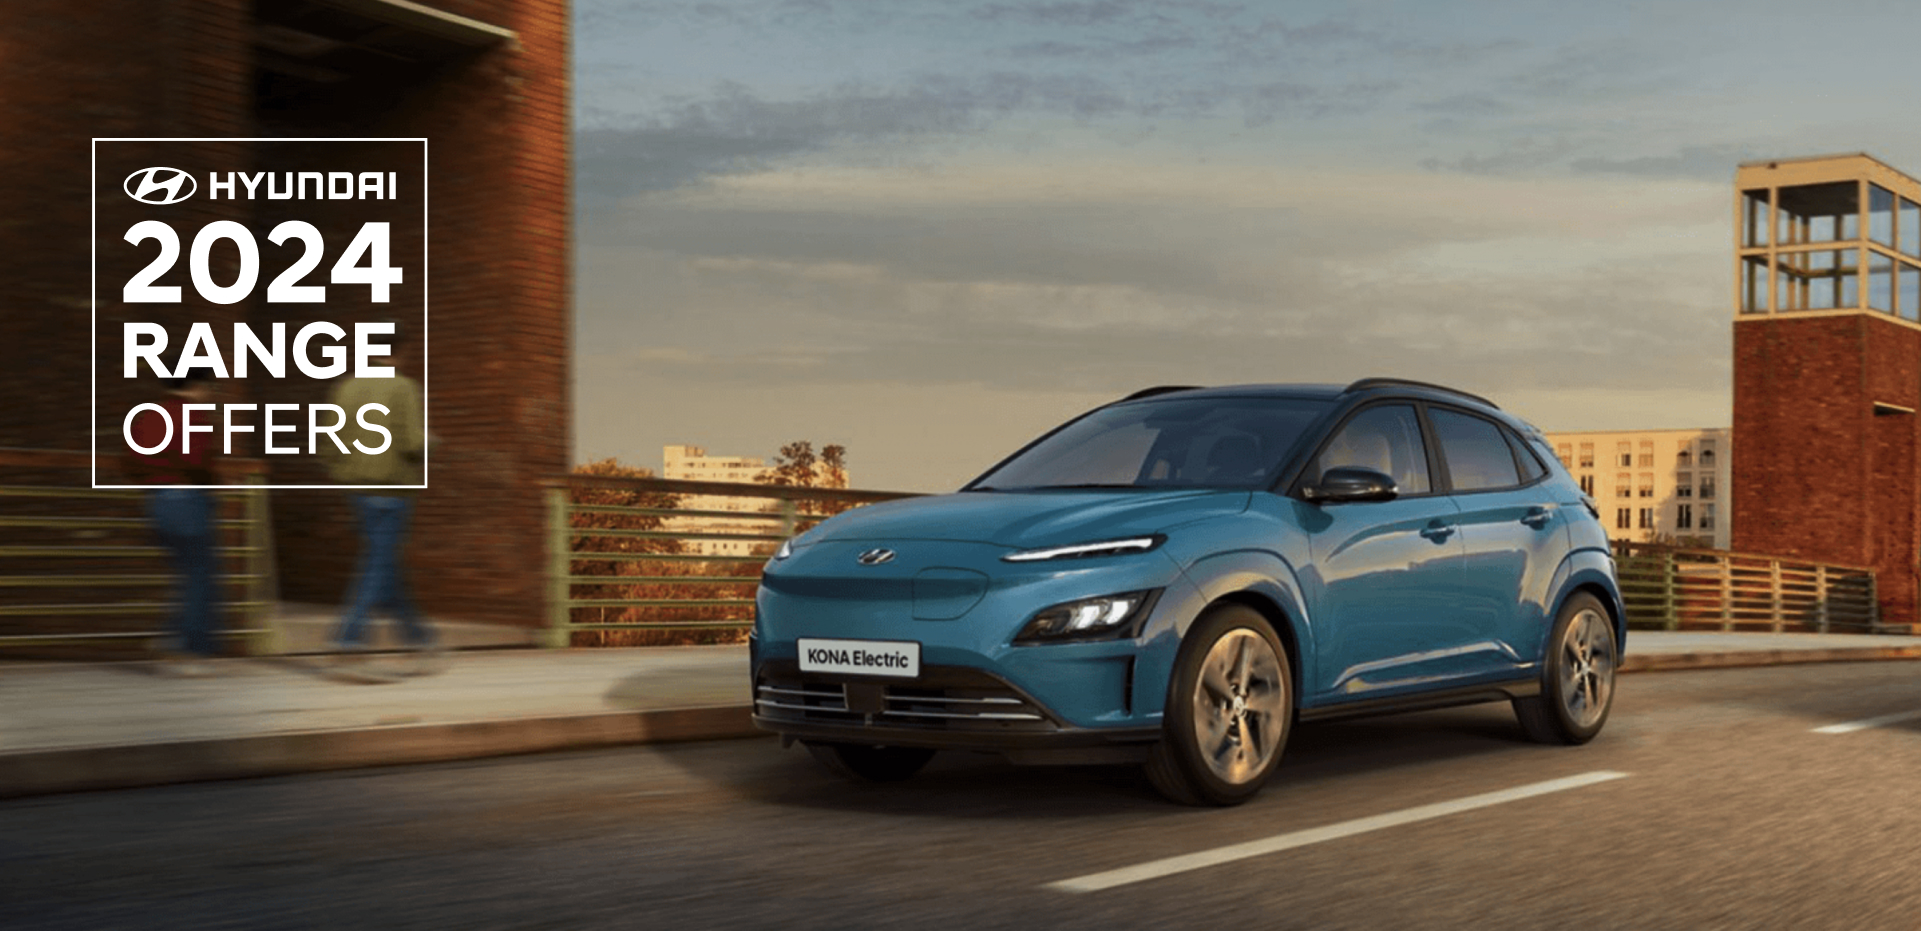 The new Hyundai Kona Electric from the front in Dive in Jeju, standing on a road in the city.